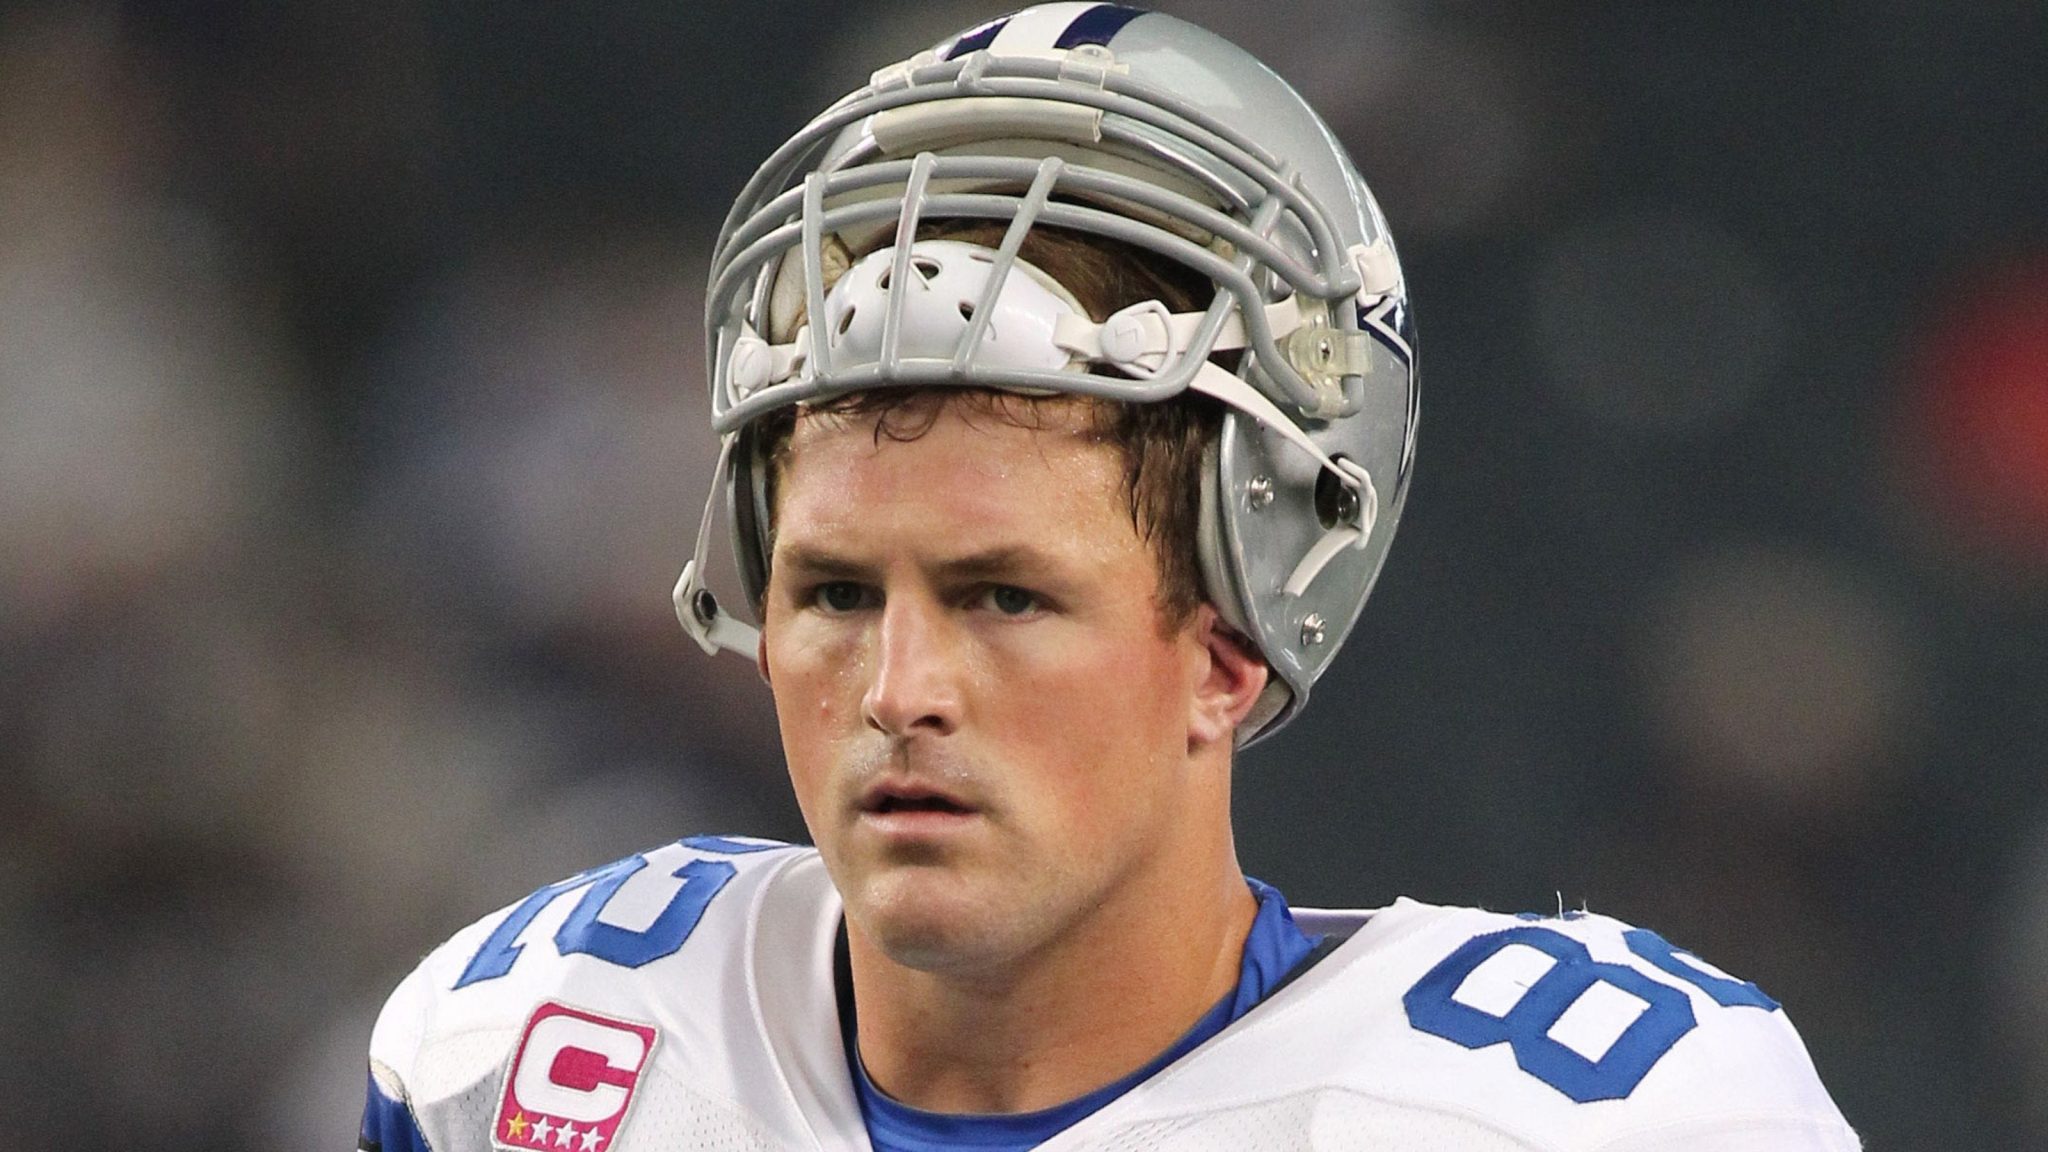 Jason Witten Nationality, Religion, Family, and Net Worth